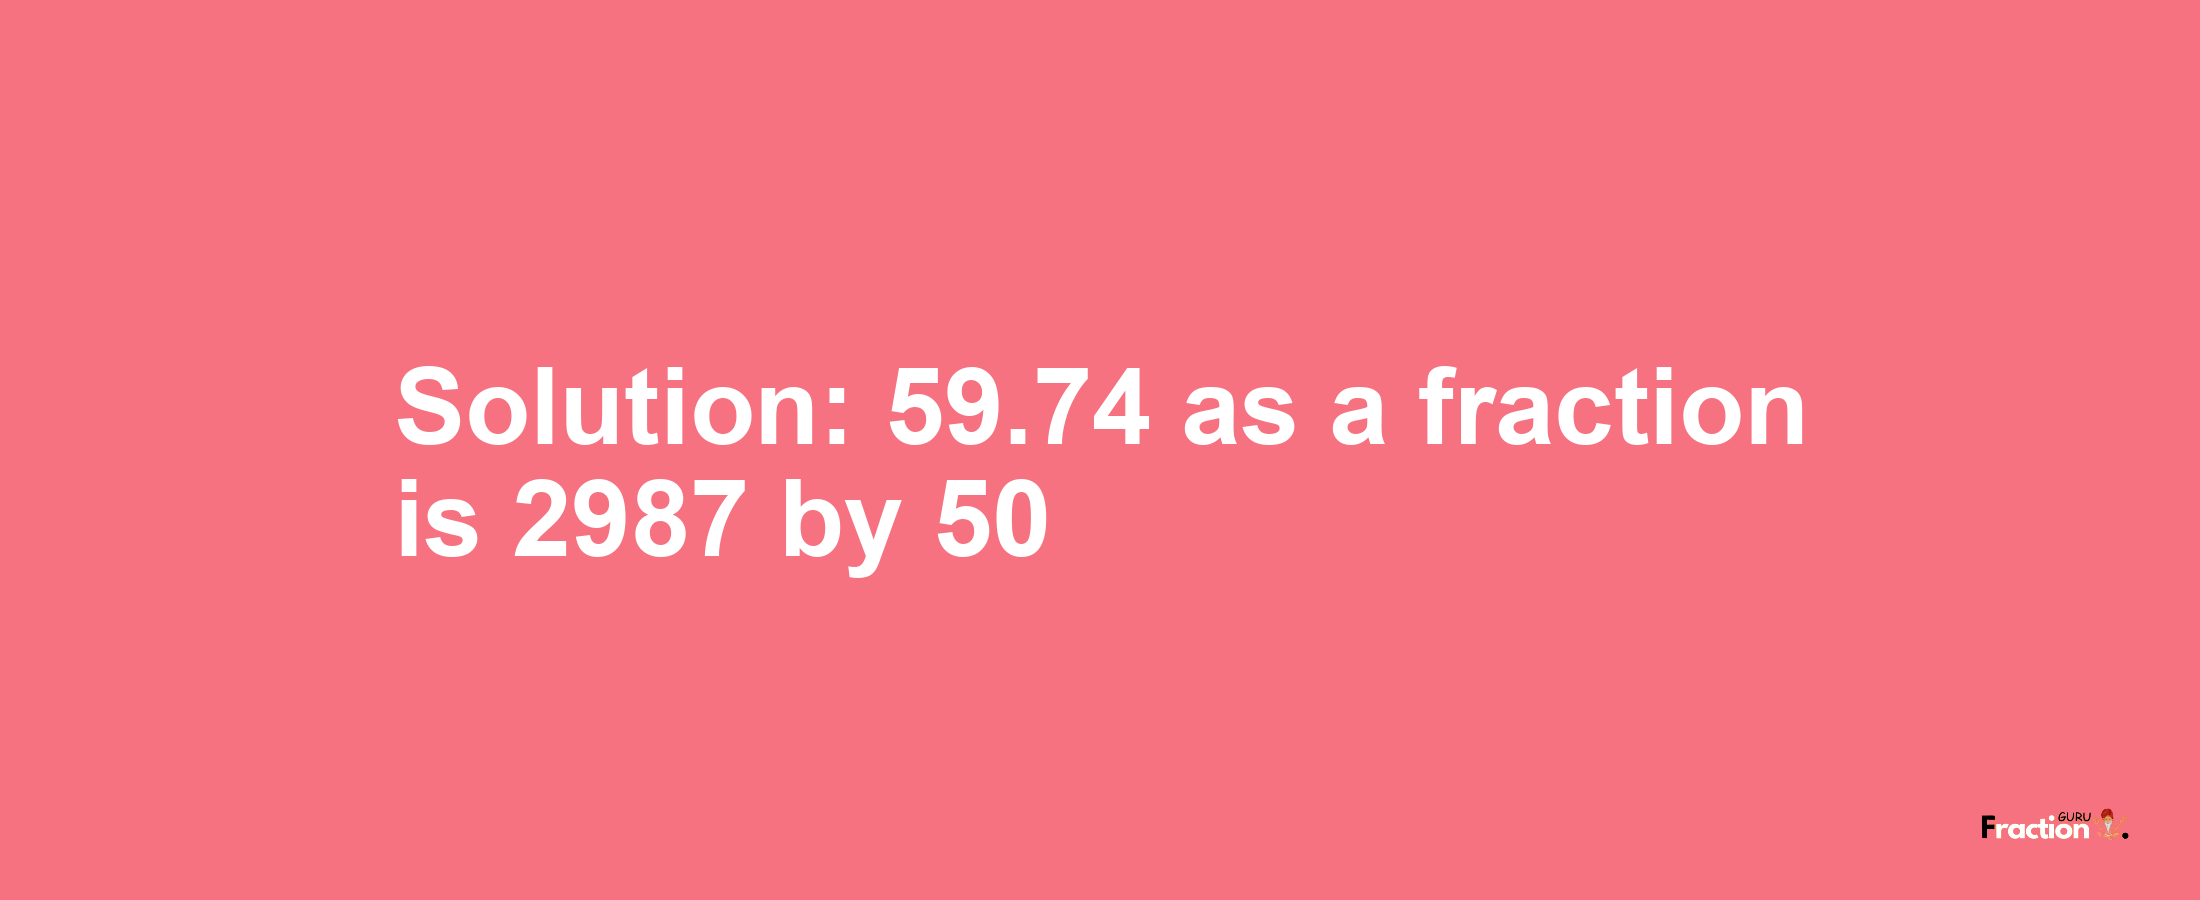 Solution:59.74 as a fraction is 2987/50